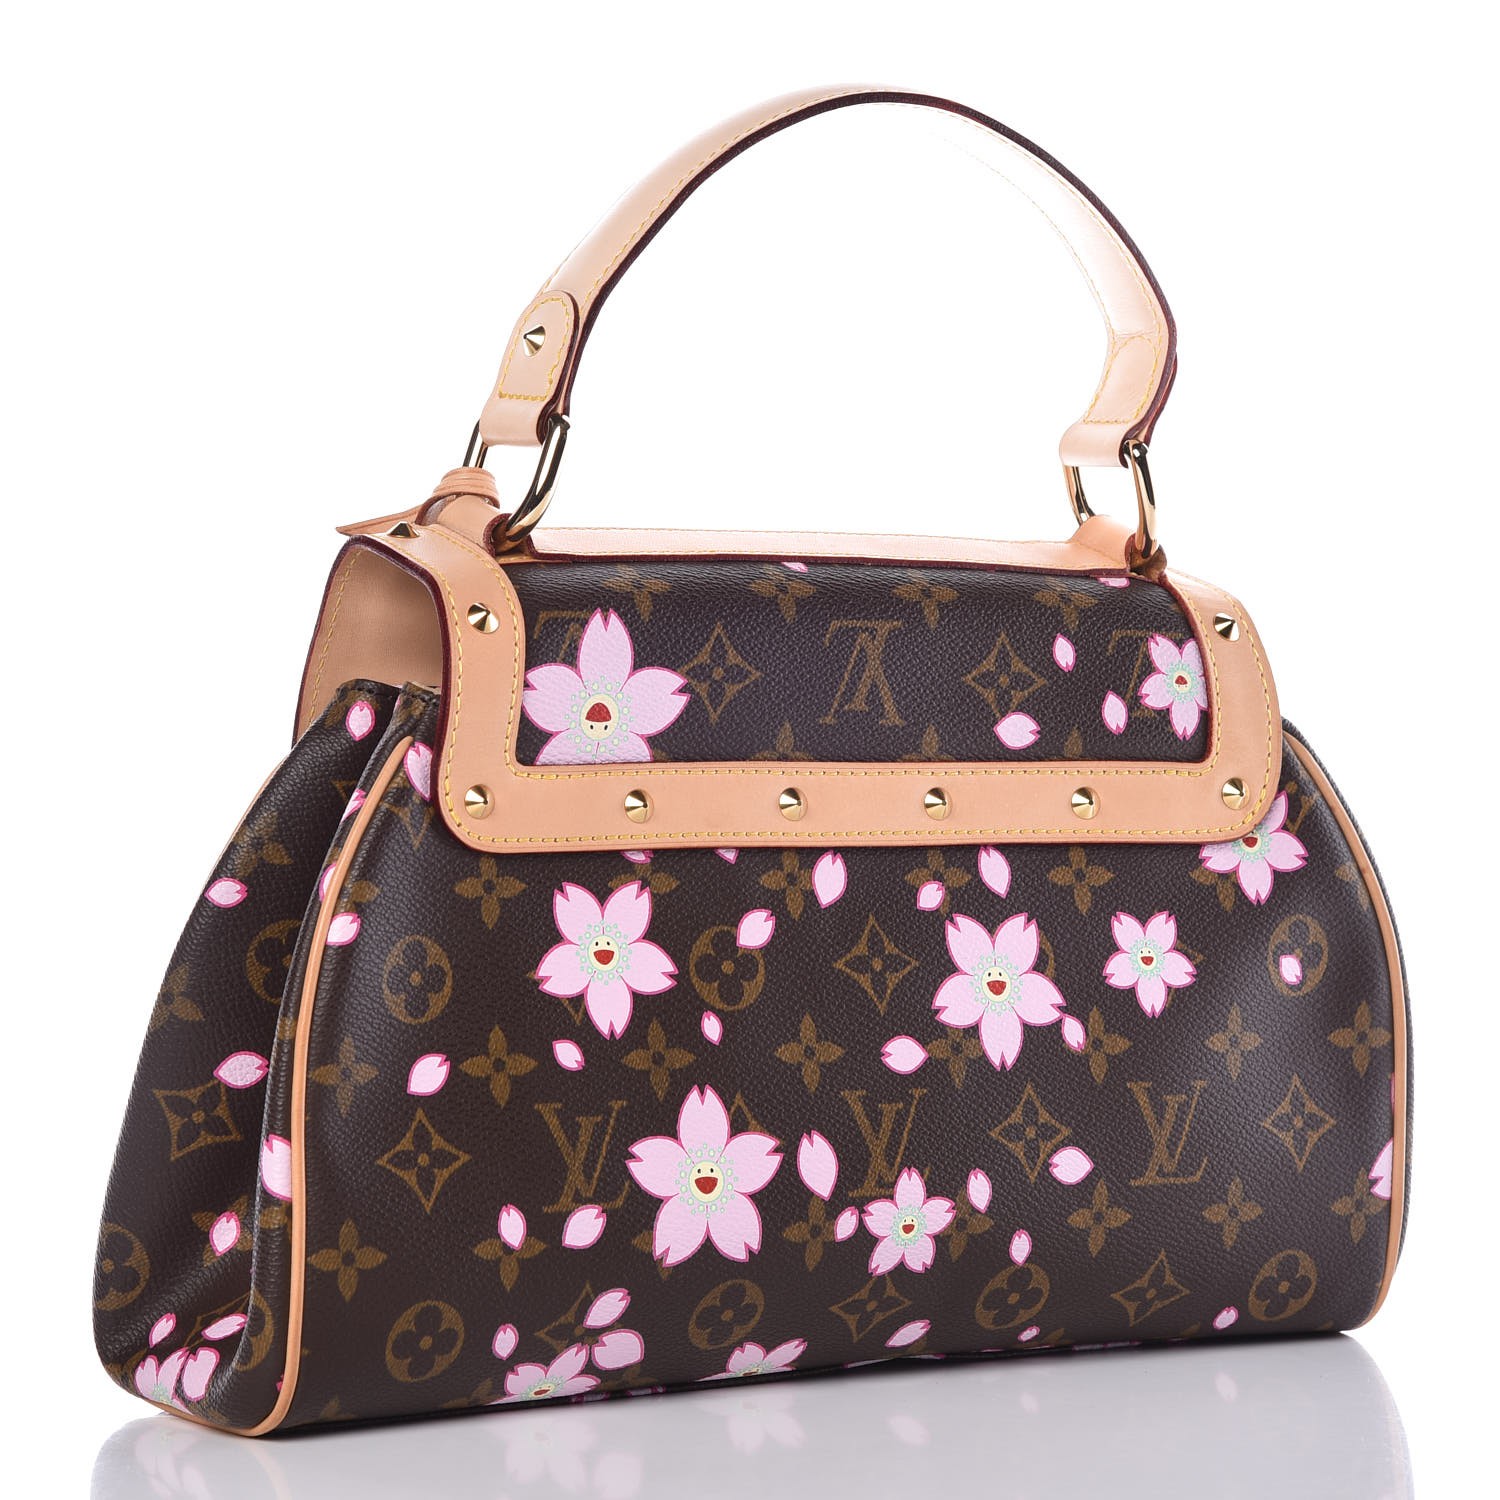 Lv cherry blossom pouchette🌸 one of the bags Regina carried in Mean G